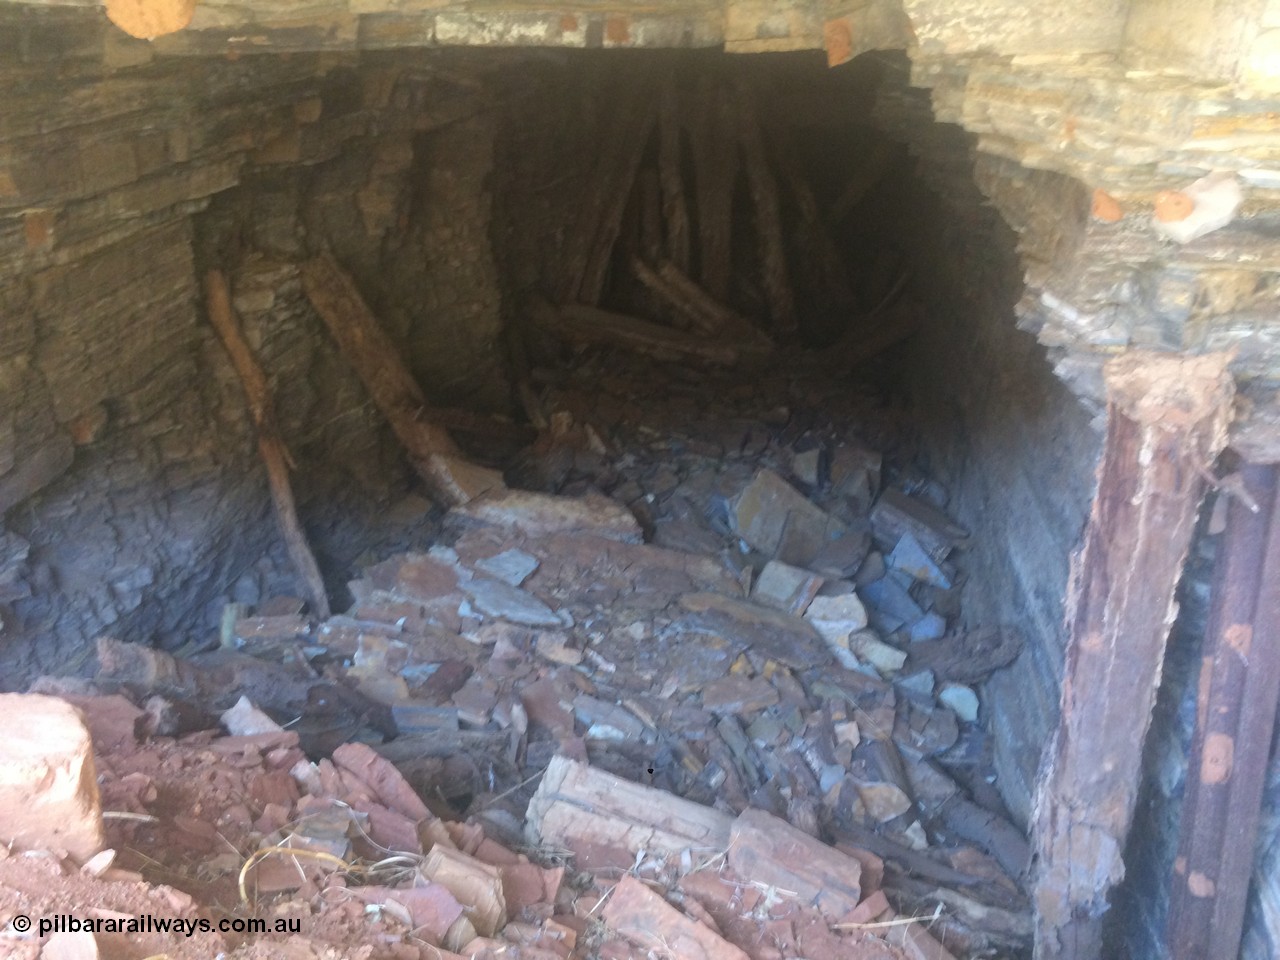 160101 2300
Wittenoom Gorge, Gorge Mine area, view inside drive No. 5, formally sealed, erosion has collapsed the sealing door, geodata: [url=https://goo.gl/maps/DhrpUNab8Px] -22.3247417 118.3277889 [/url], iPhone 5S image.
